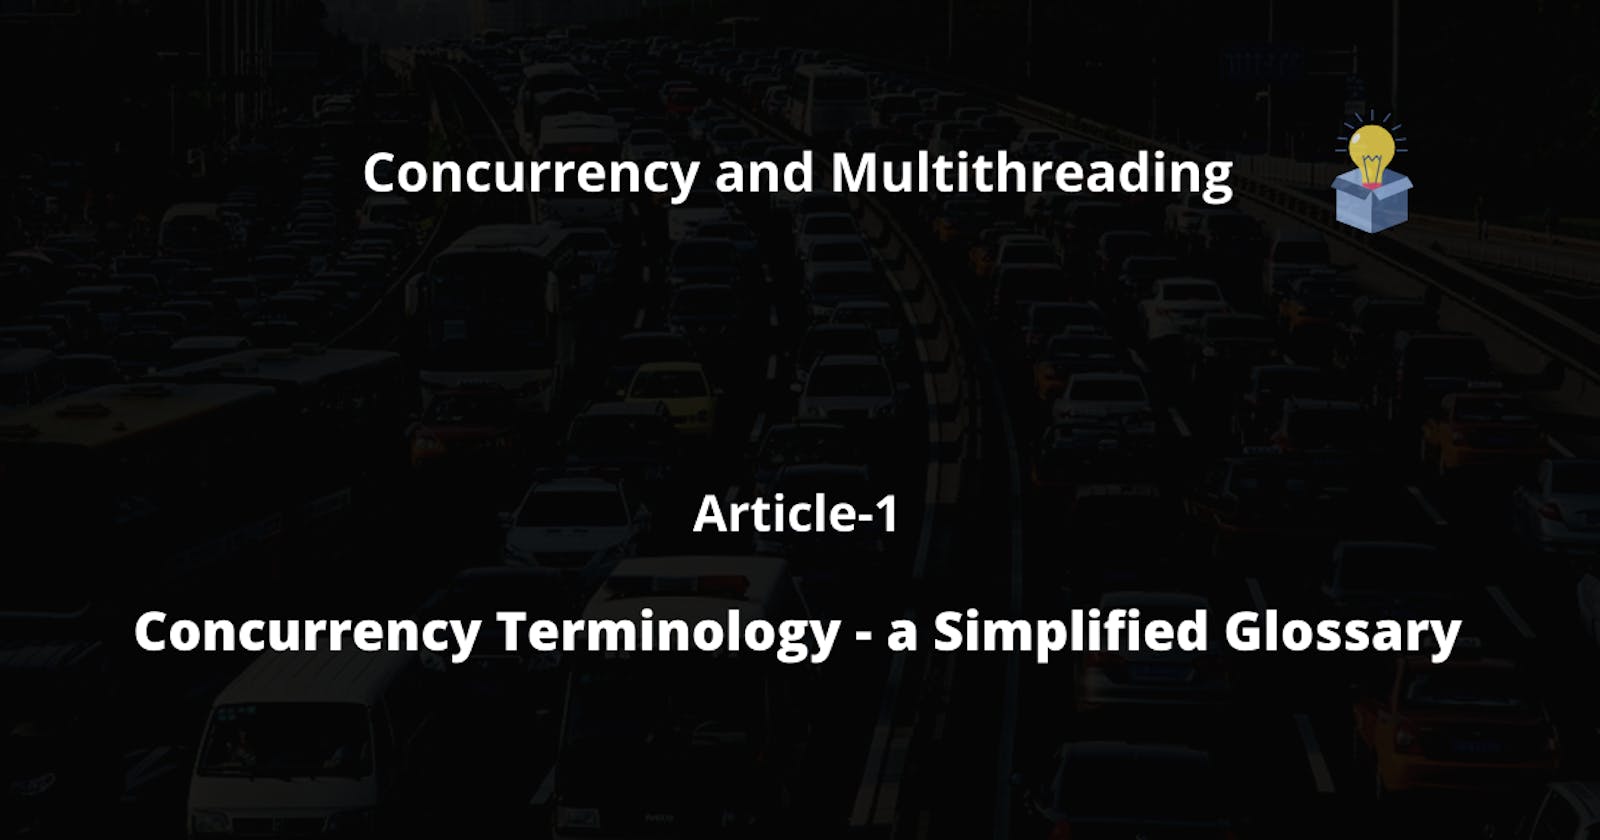 Concurrency Terminology - a Simplified Glossary